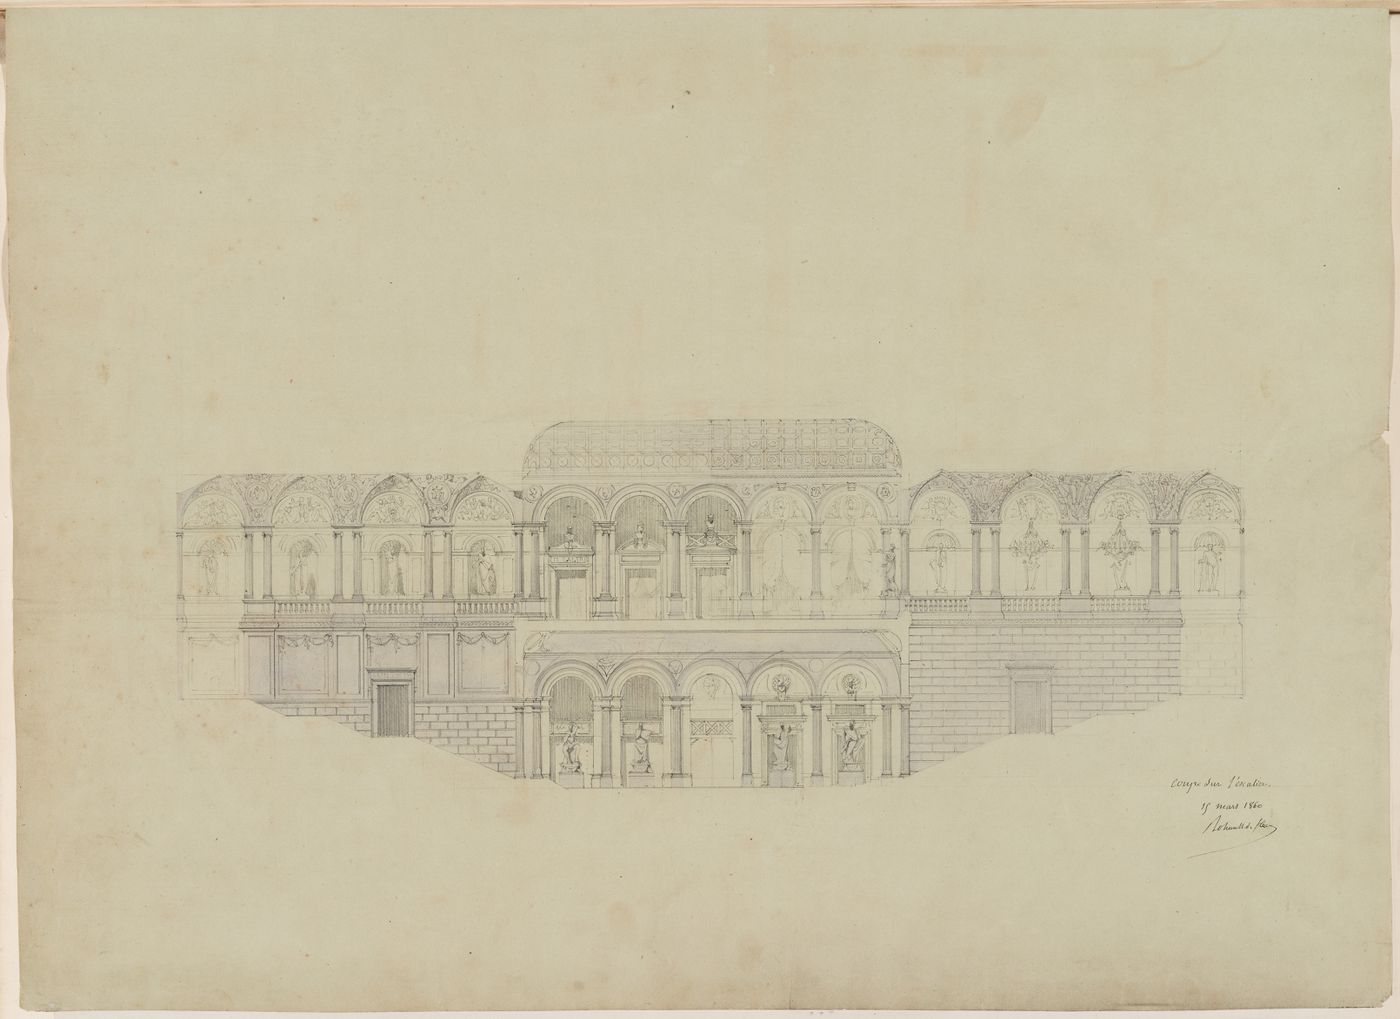 Project for an opera house for the Théâtre impérial de l'opéra: Cross section through the stairs